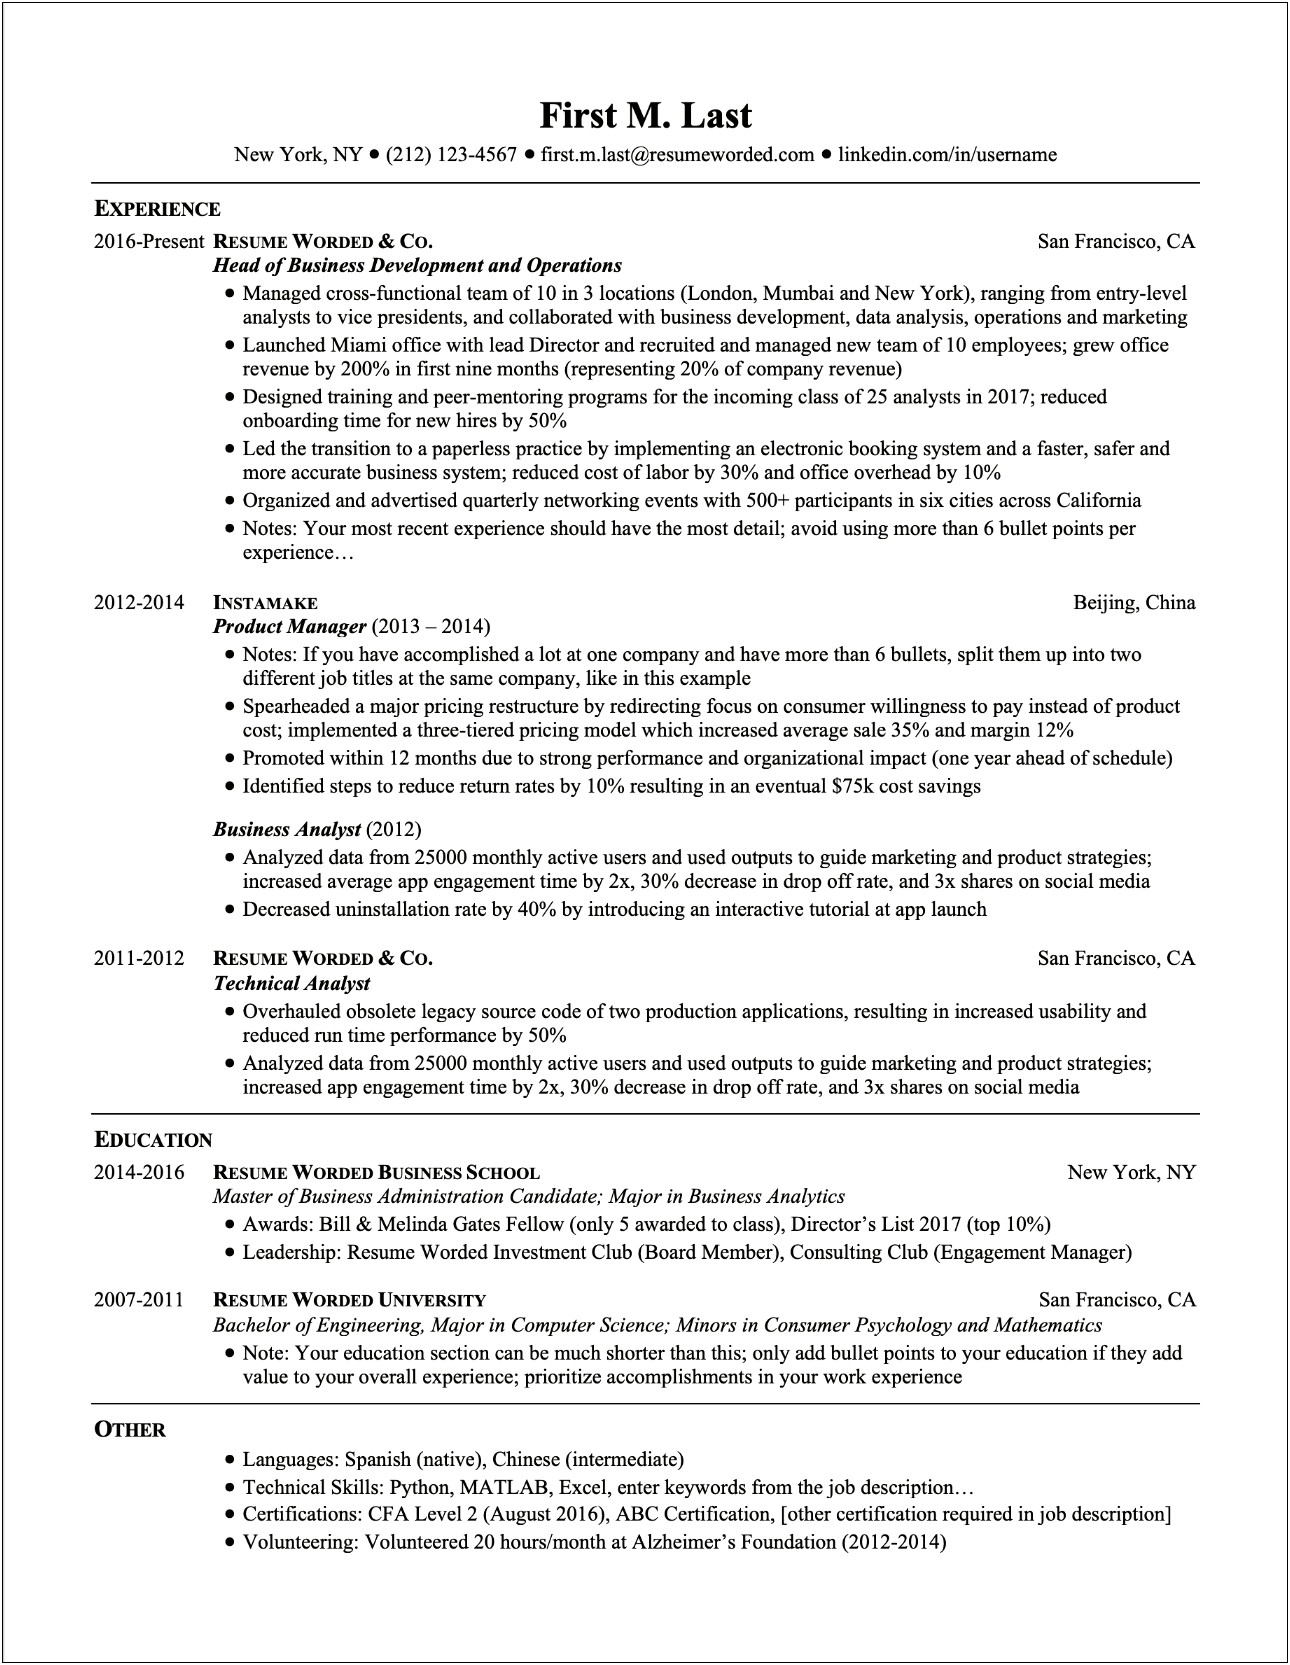 30 Years Old No Work Experience Resume